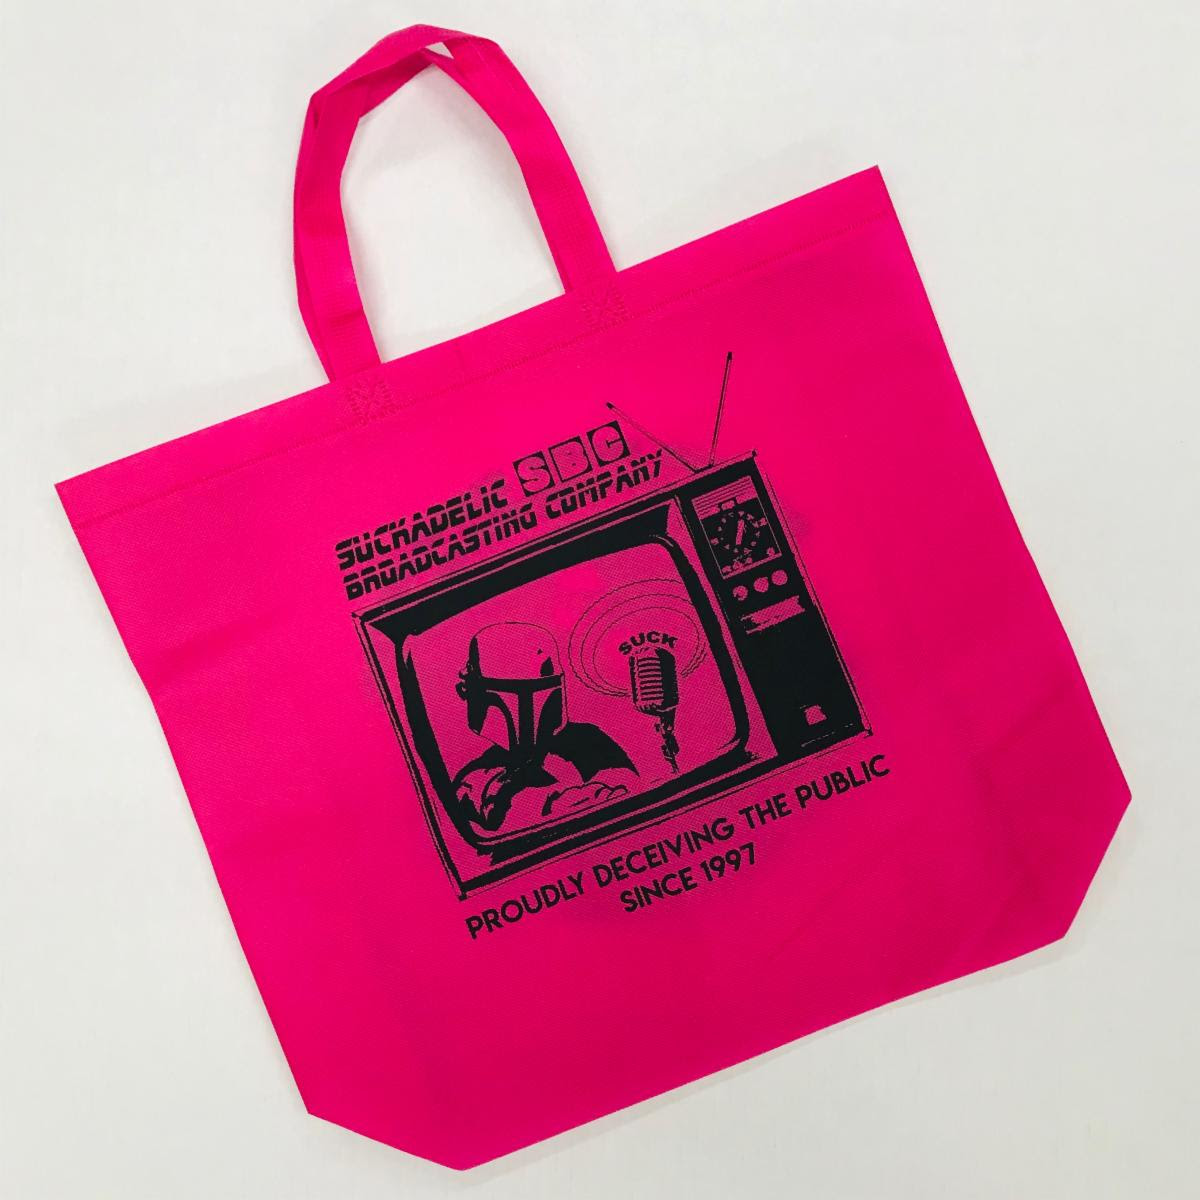 Free Suckadelic tote bag with purchase!